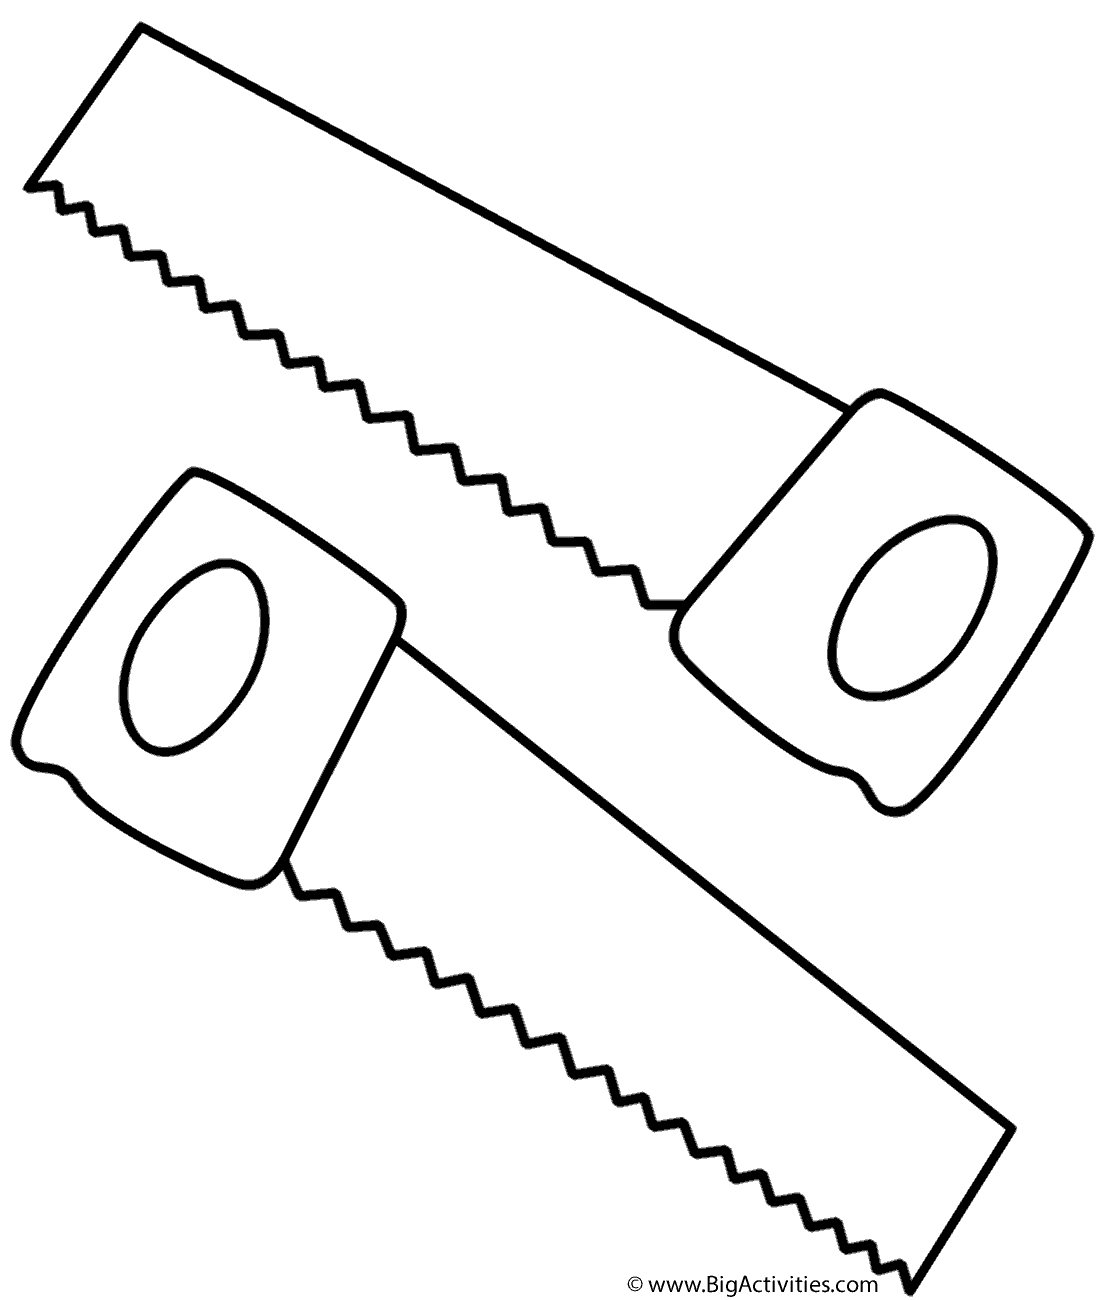 Saws - Coloring Page (Father's Day)